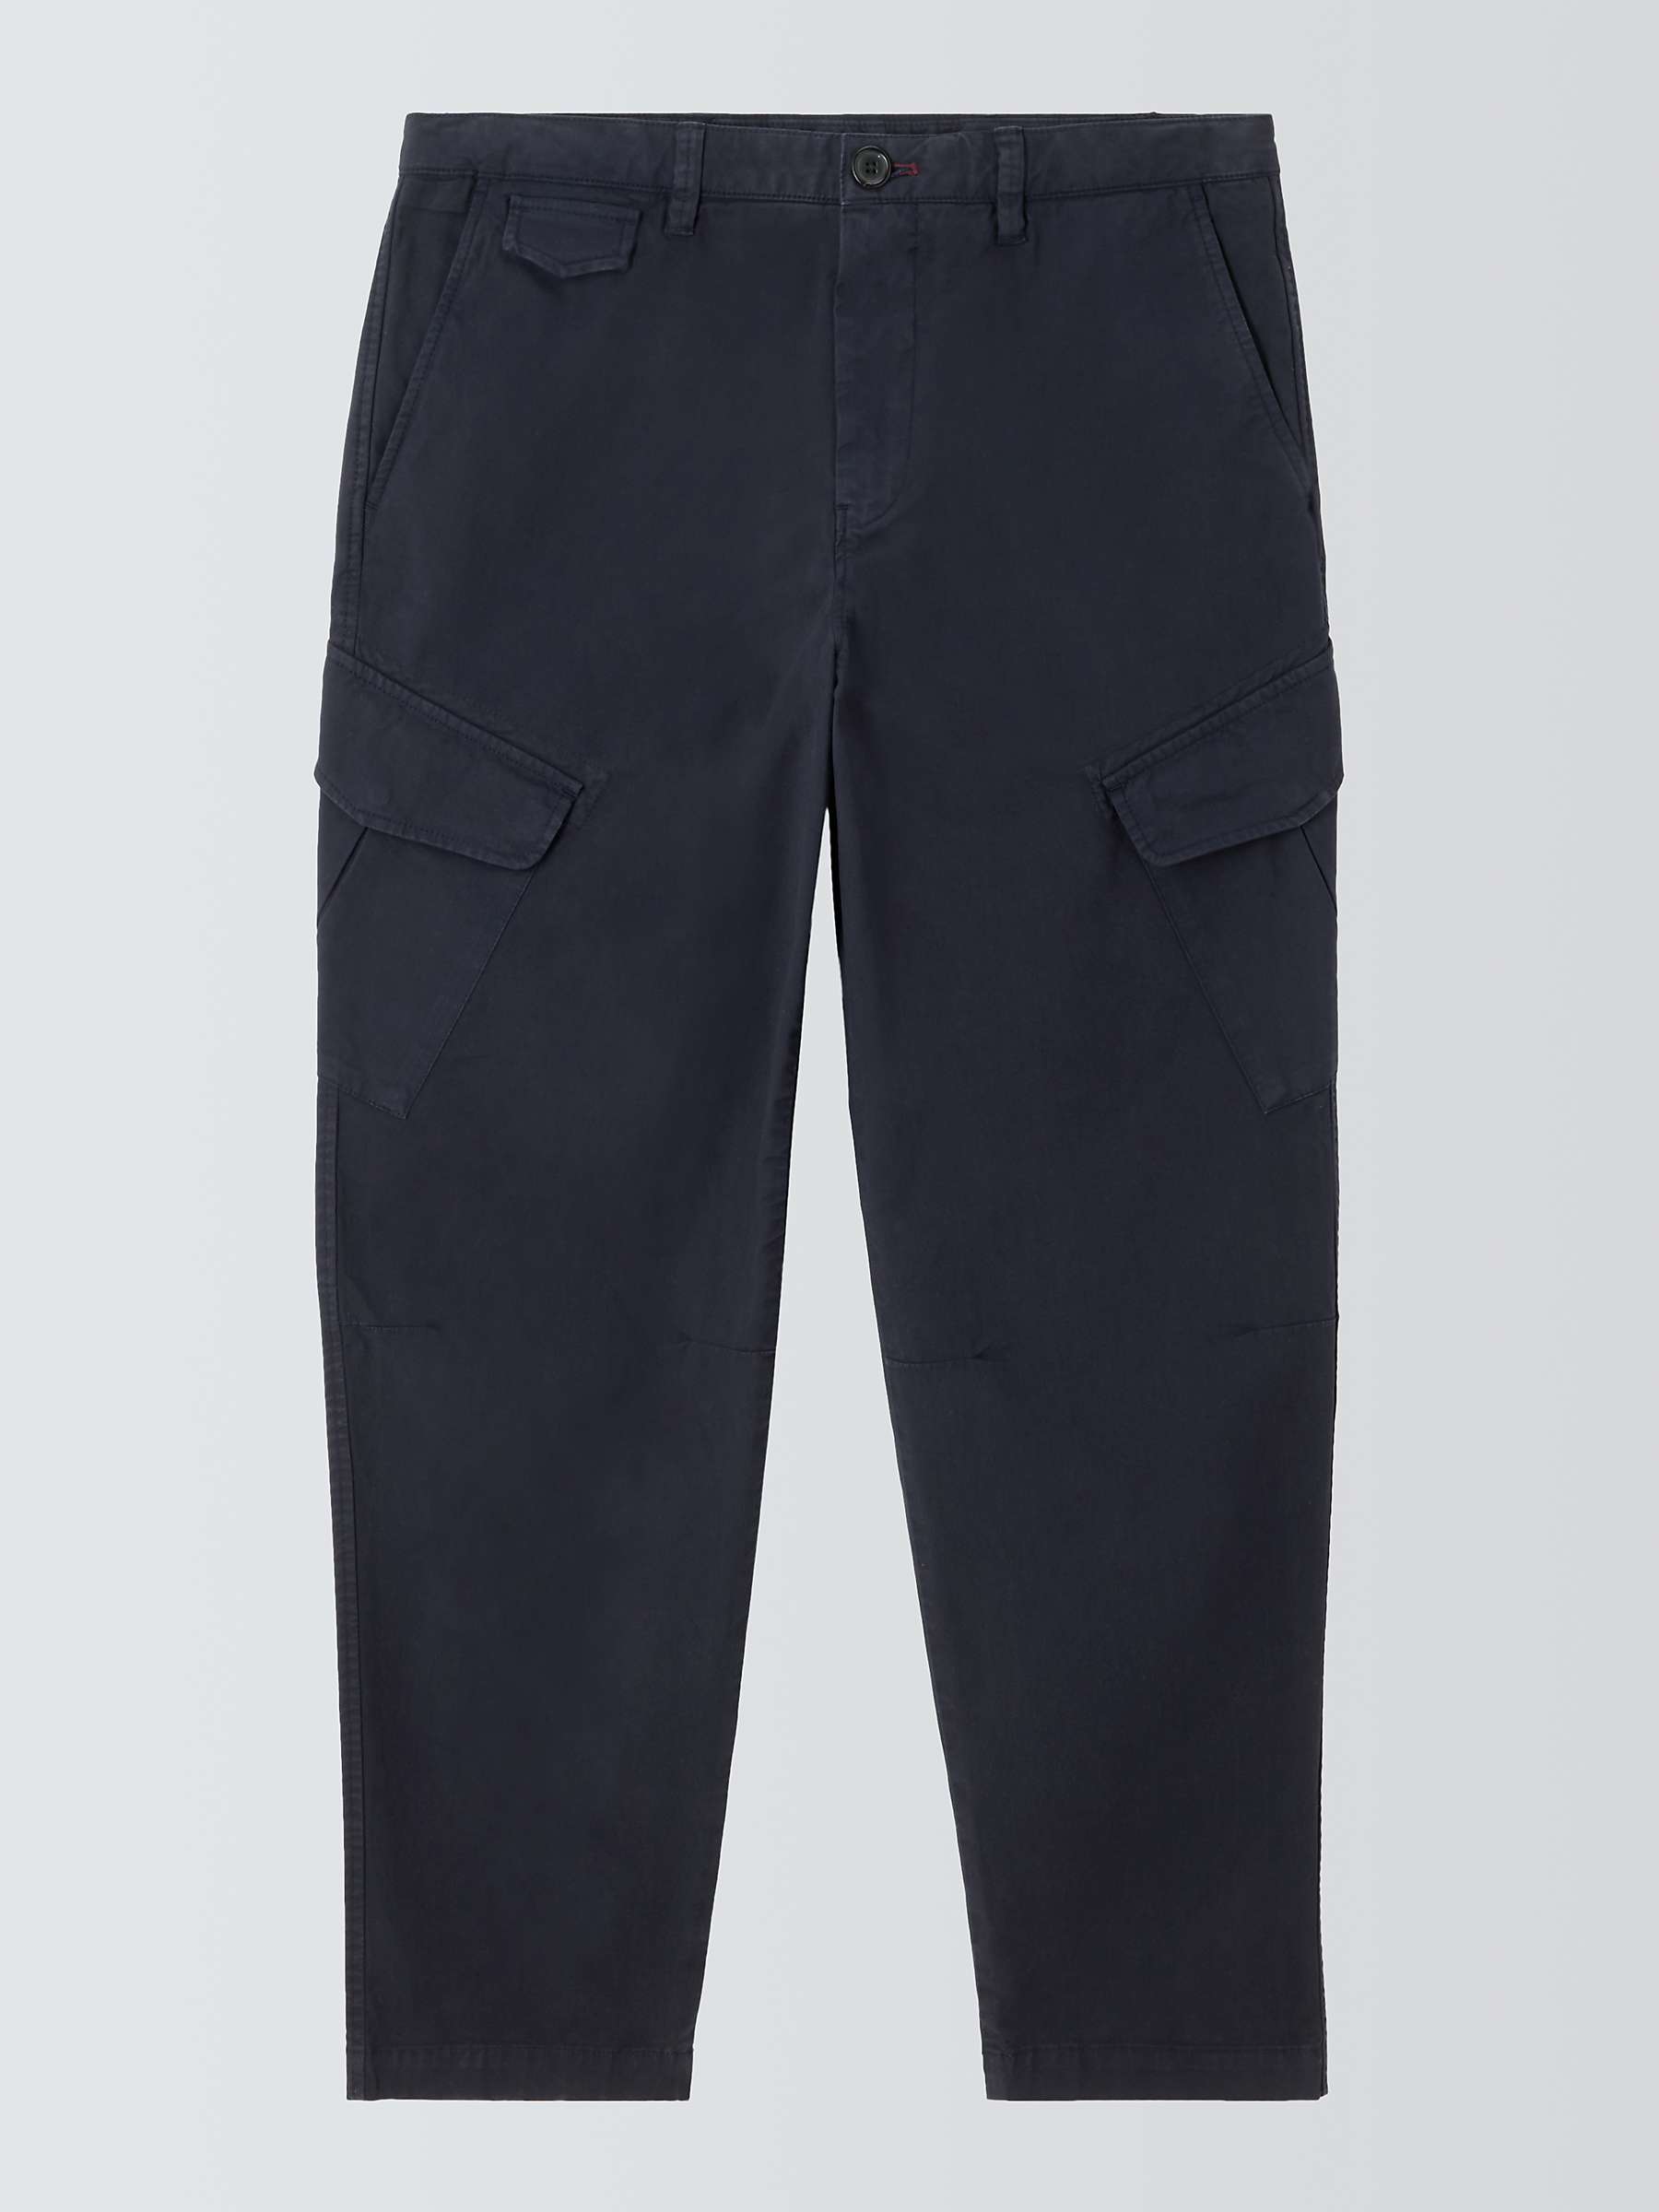 Buy Paul Smith Organic Cotton Chinos, Navy Online at johnlewis.com